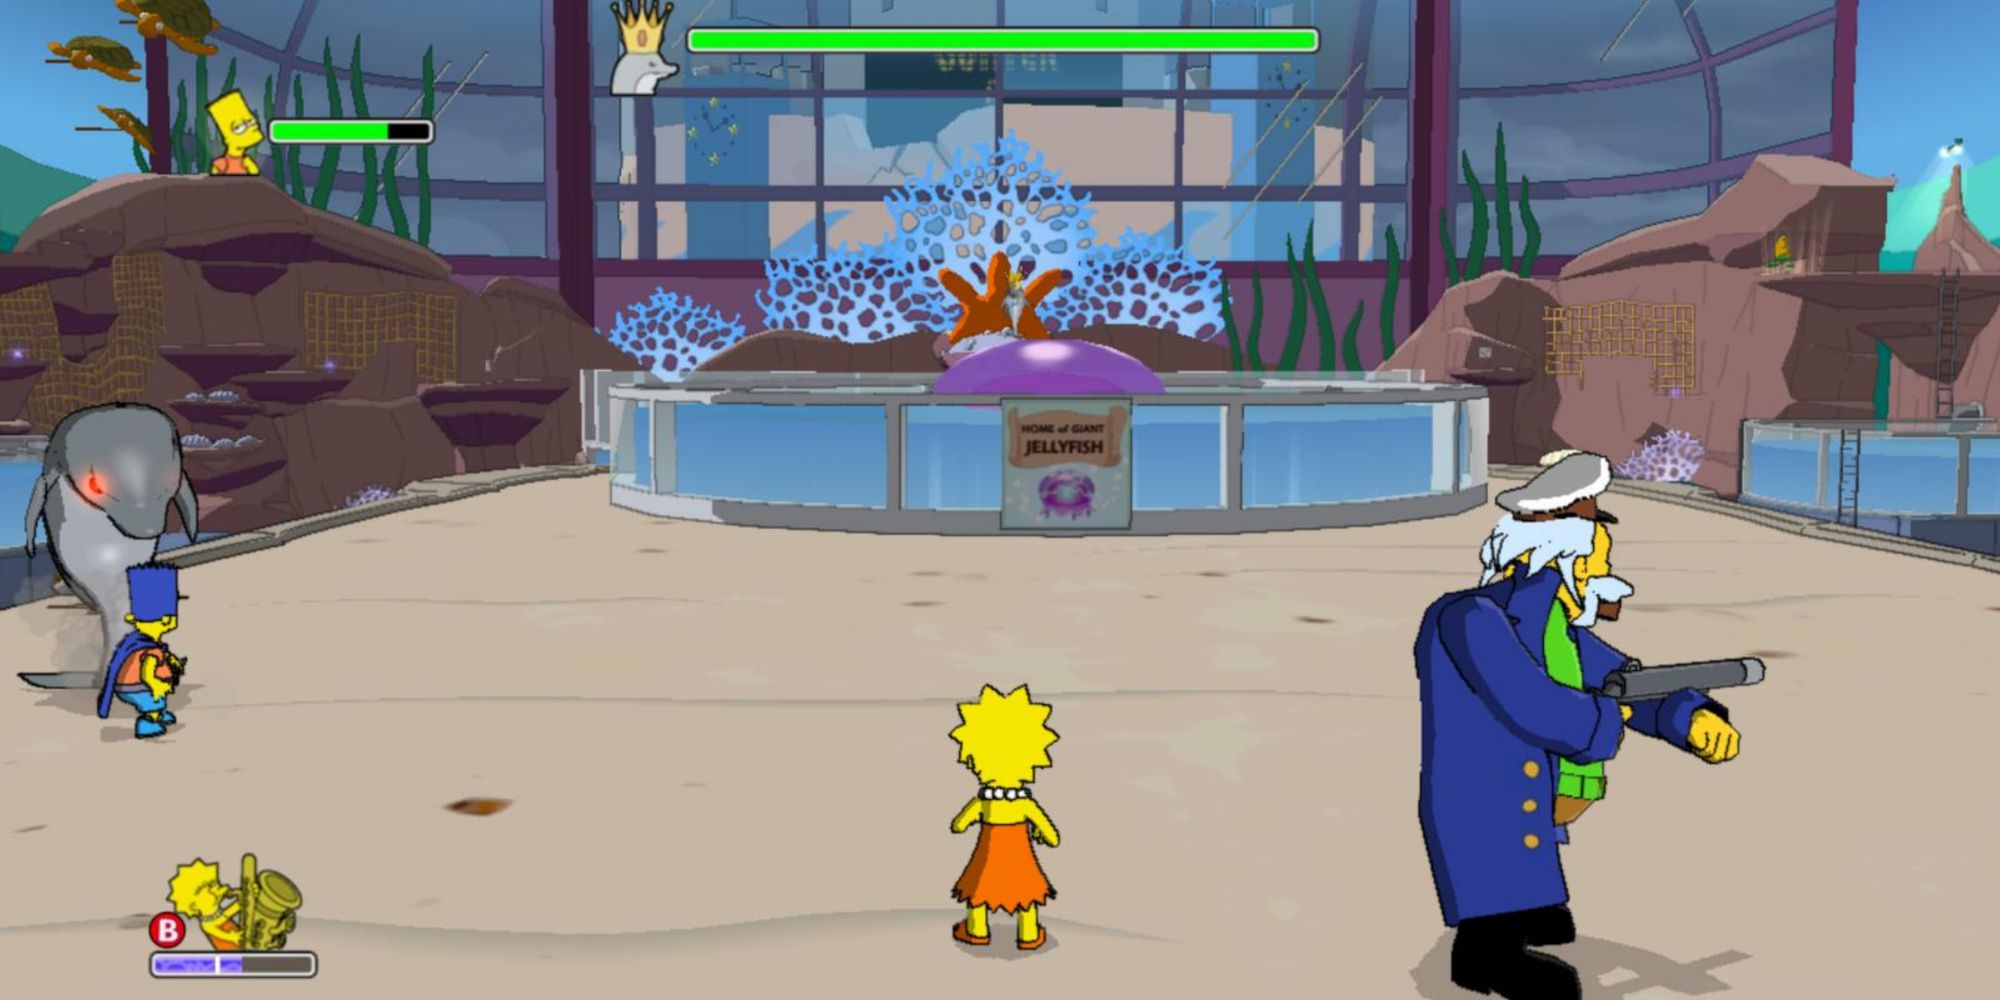 Fight bosses in simpsons games